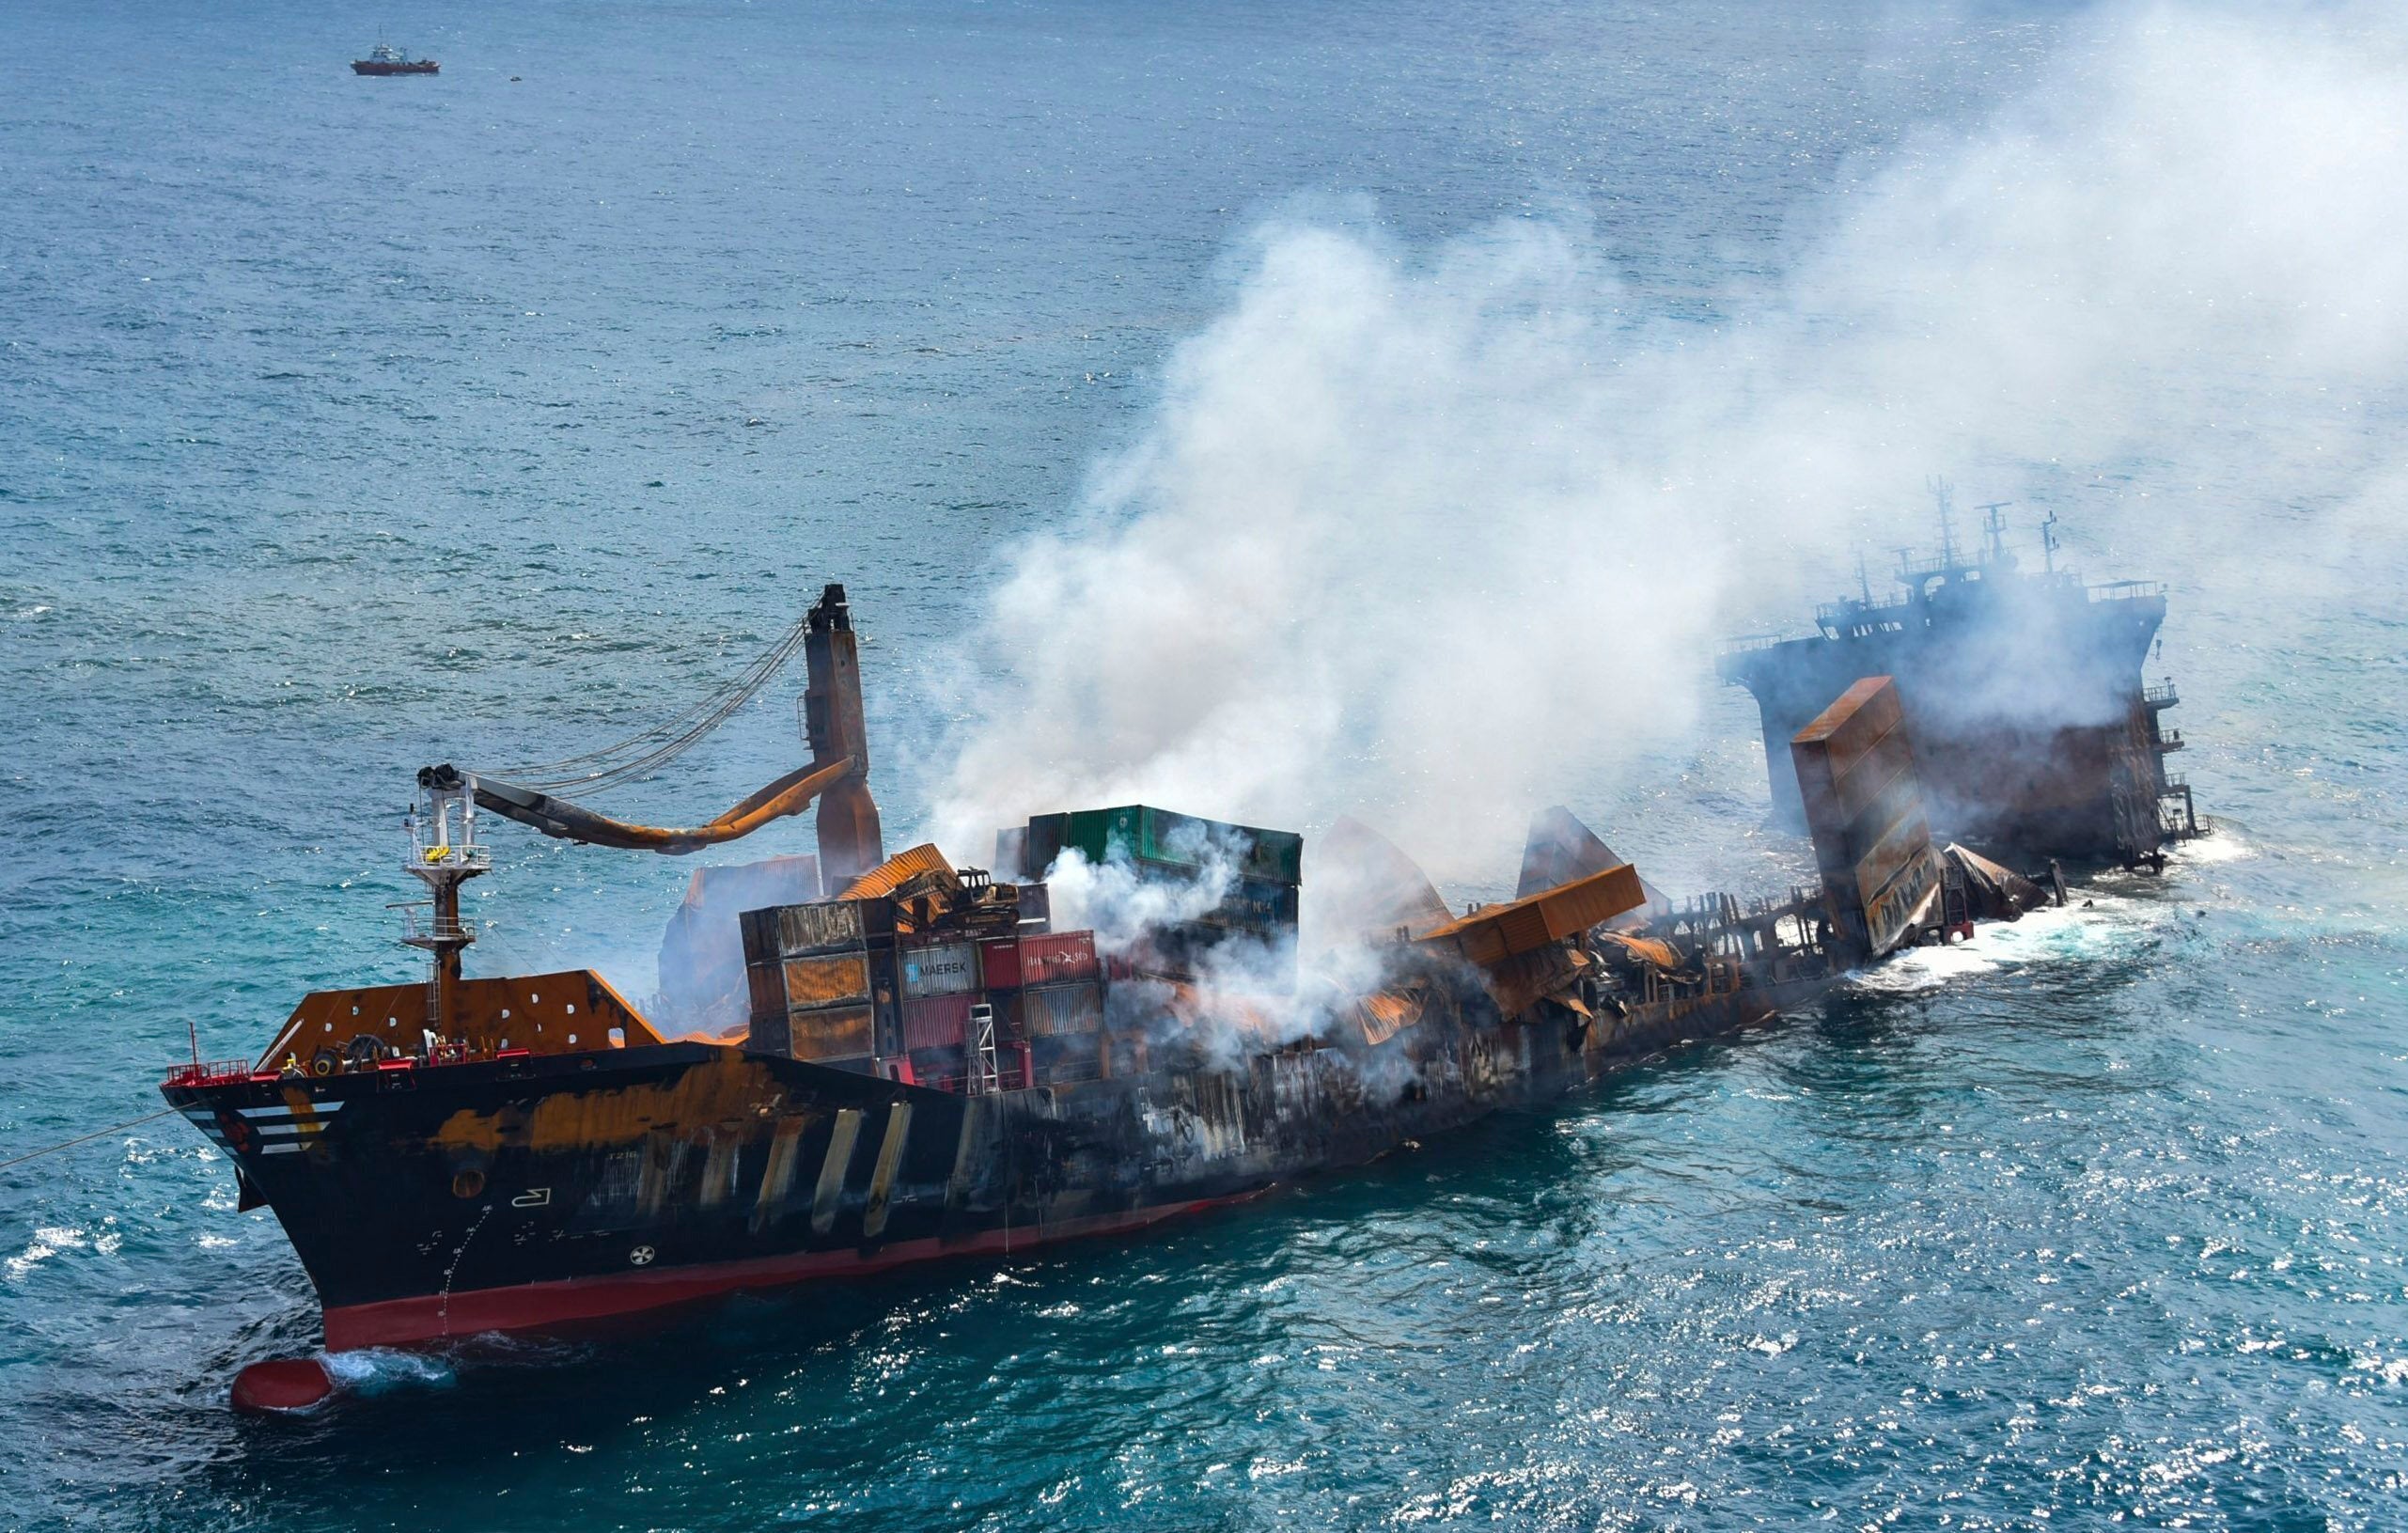 Photo provided by the Sri Lankan air force shows the sinking ‘MV X-Press Pearl’